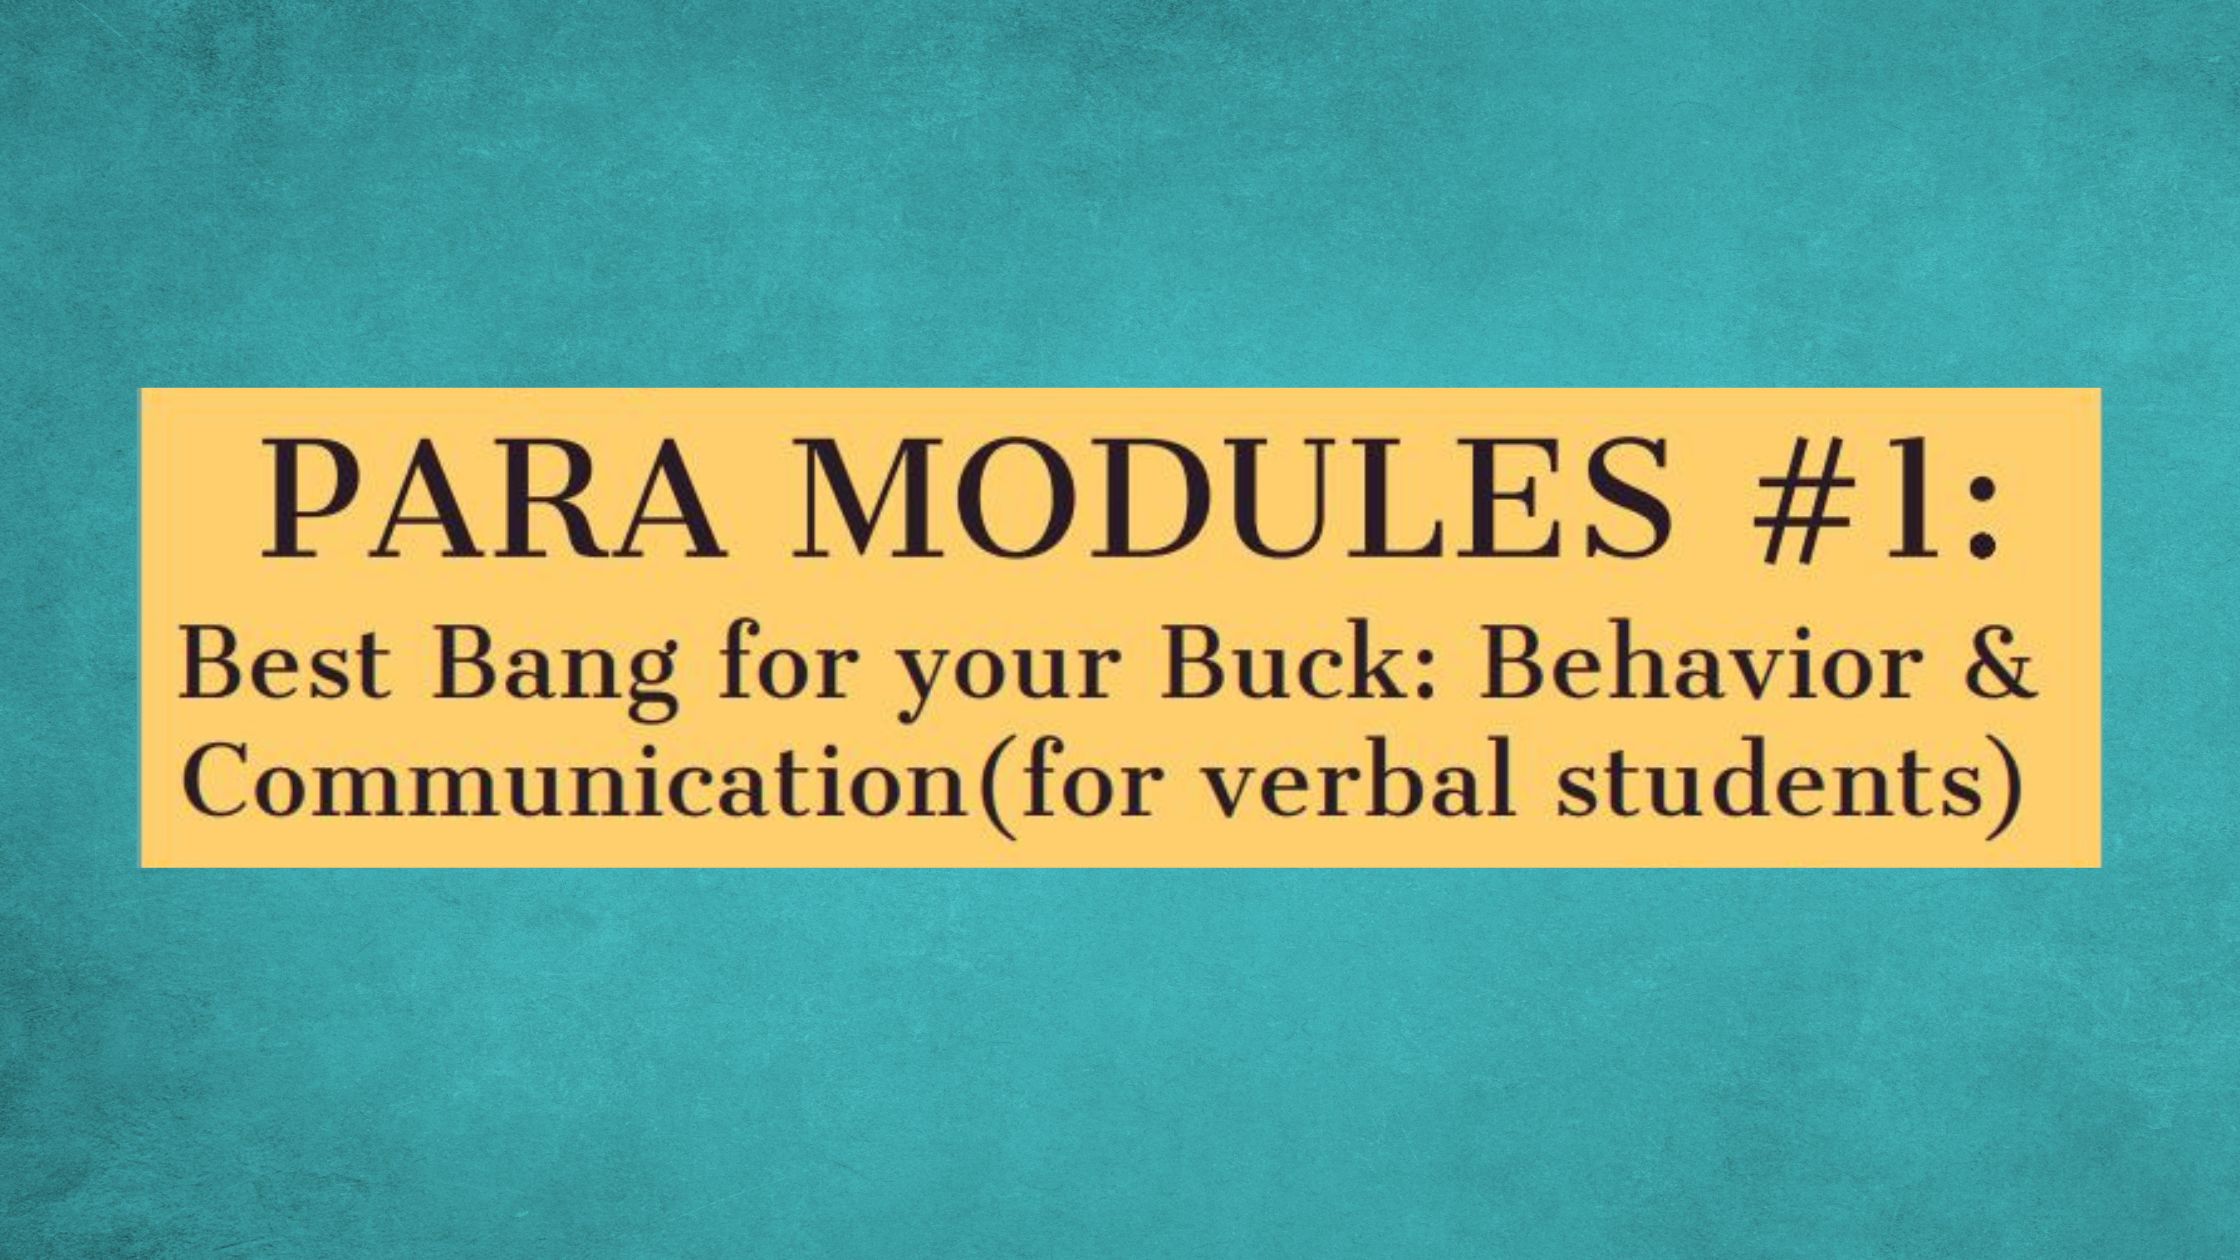 Para Modules #1: Best Bang for your Buck